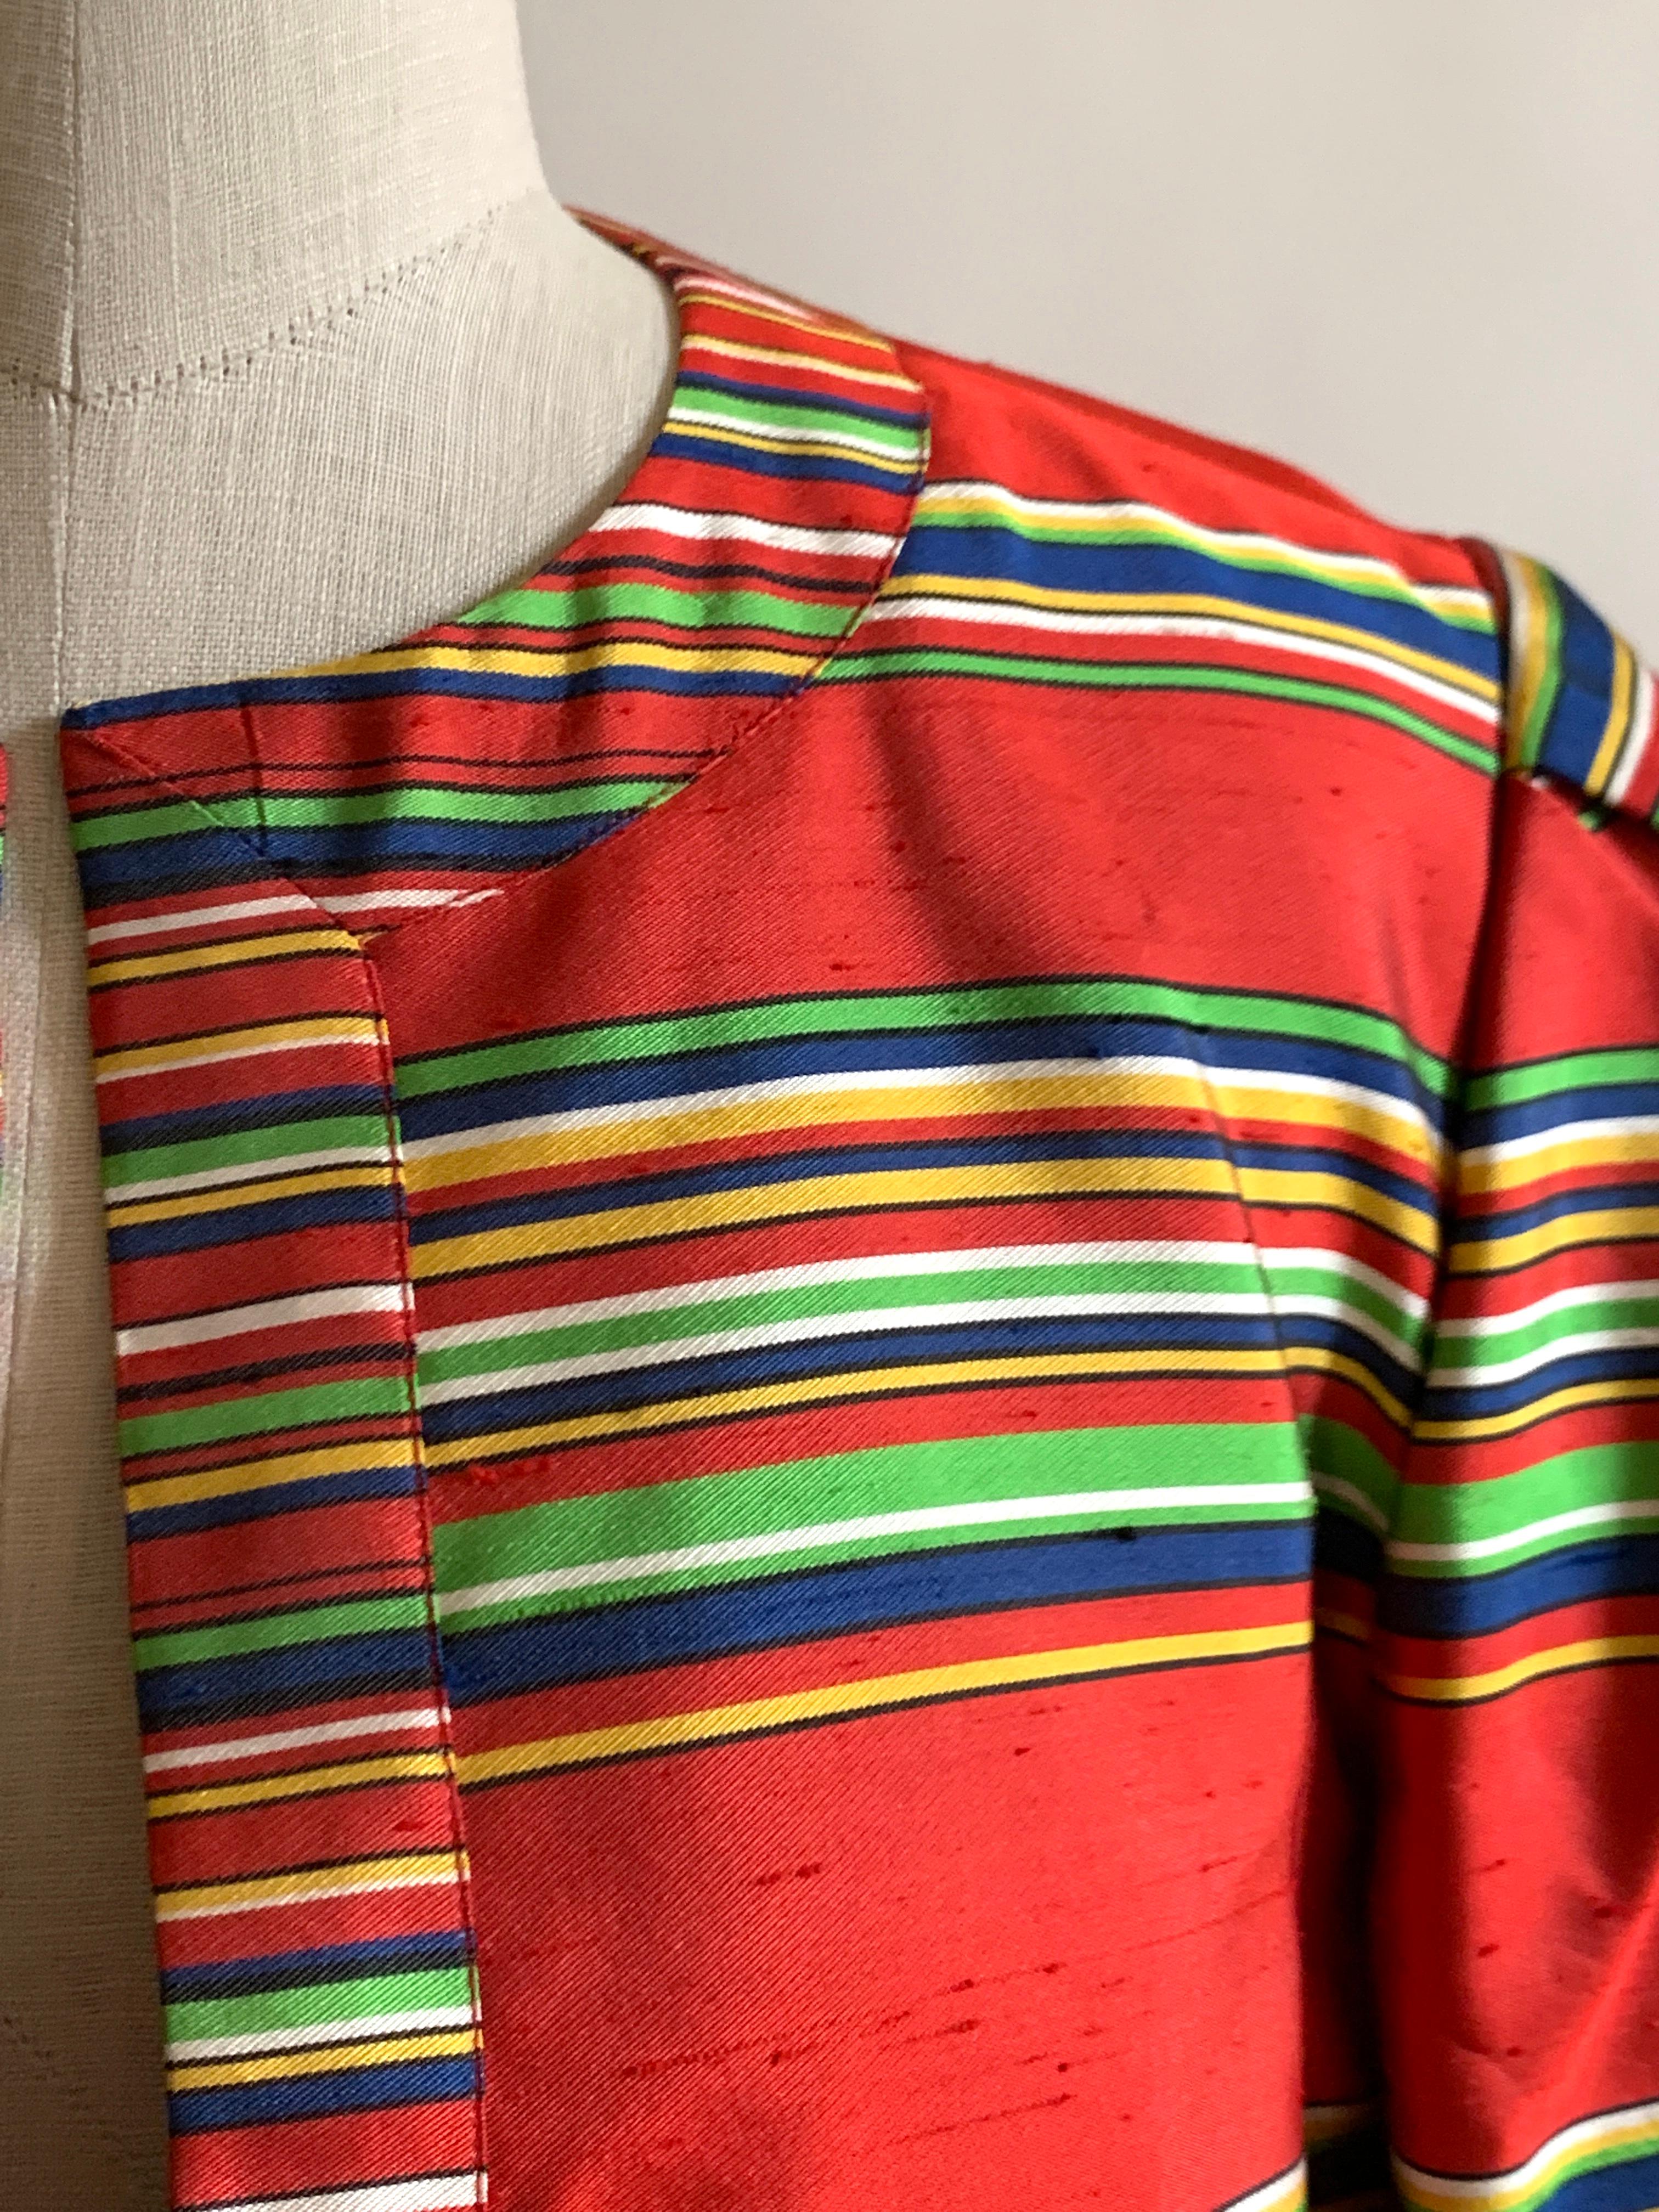 Yves Saint Laurent 1990s Silk Jacket in Red, Green, Blue and Yellow Stripe For Sale 1